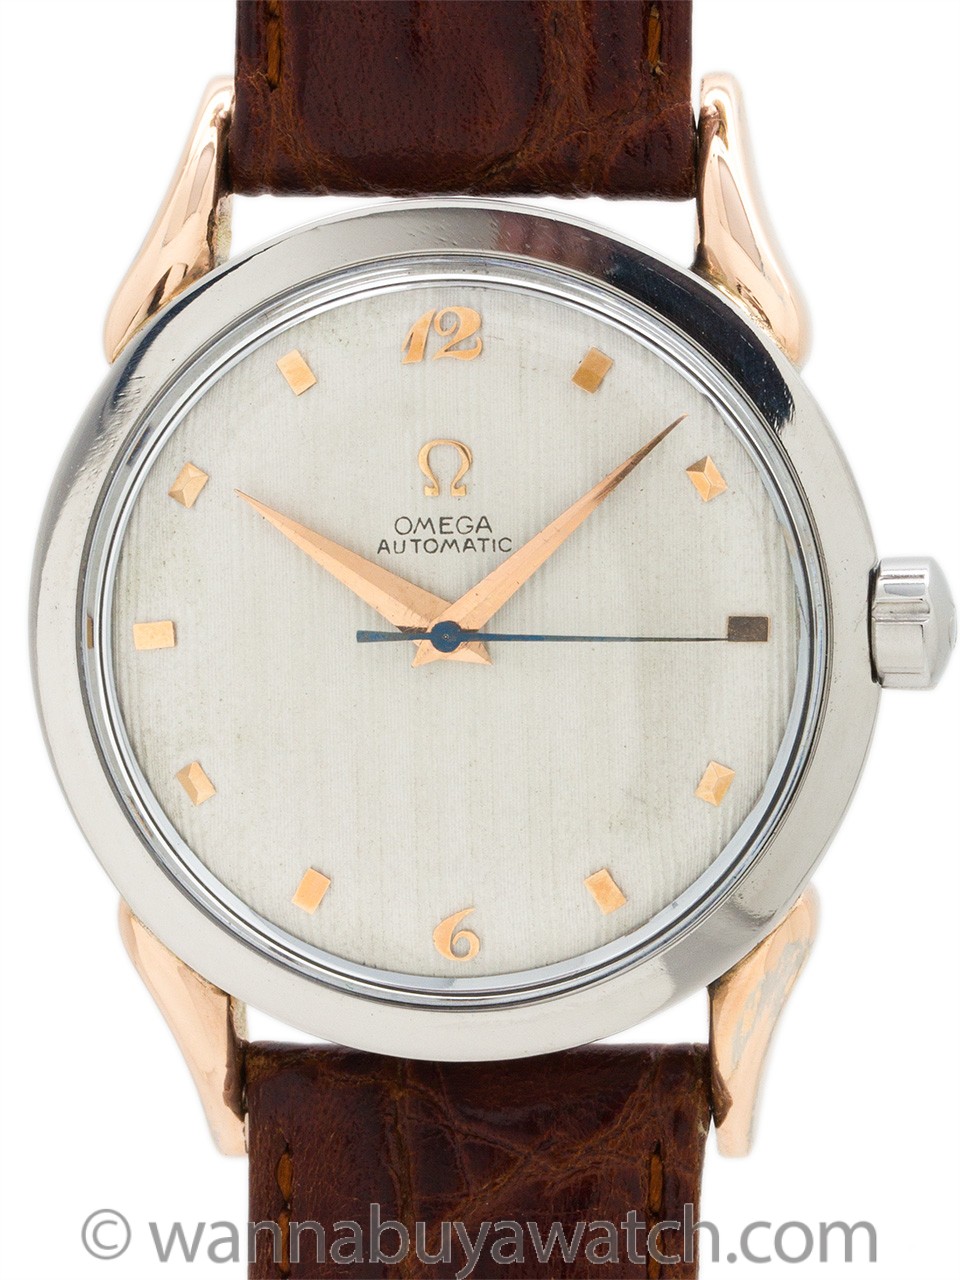 Omega Automatic ref# 2597-1 Steel & Rose Gold circa 1947